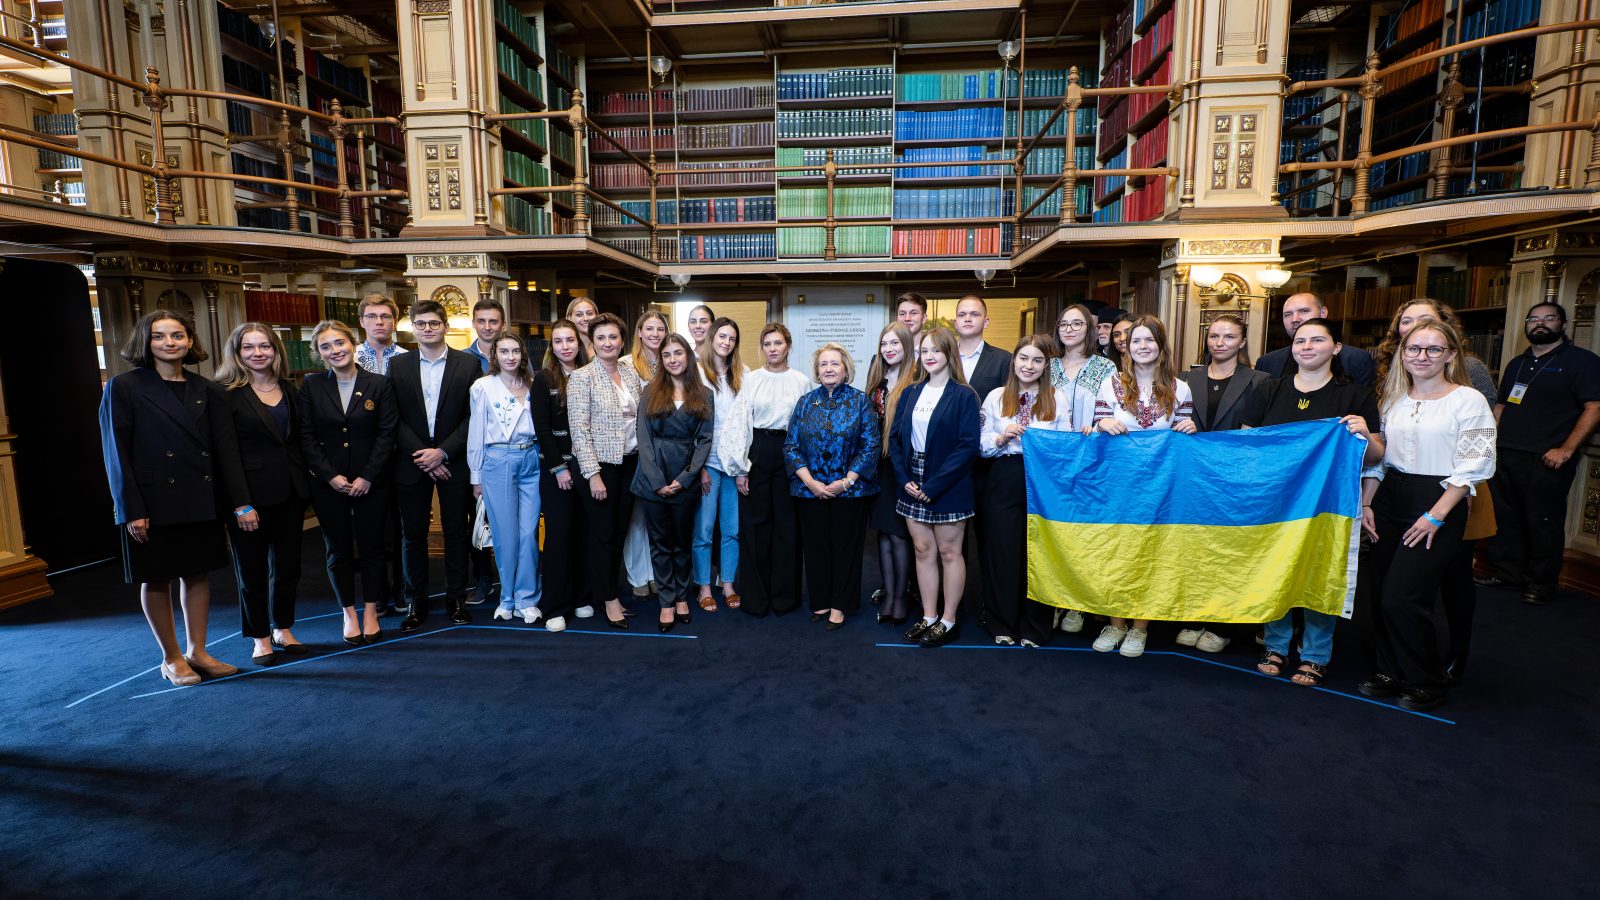 A group of Ukrainian students pose with the First Lady of Ukraine in a Georgetown library. One student holds up the yellow and blue Ukrainian flag.